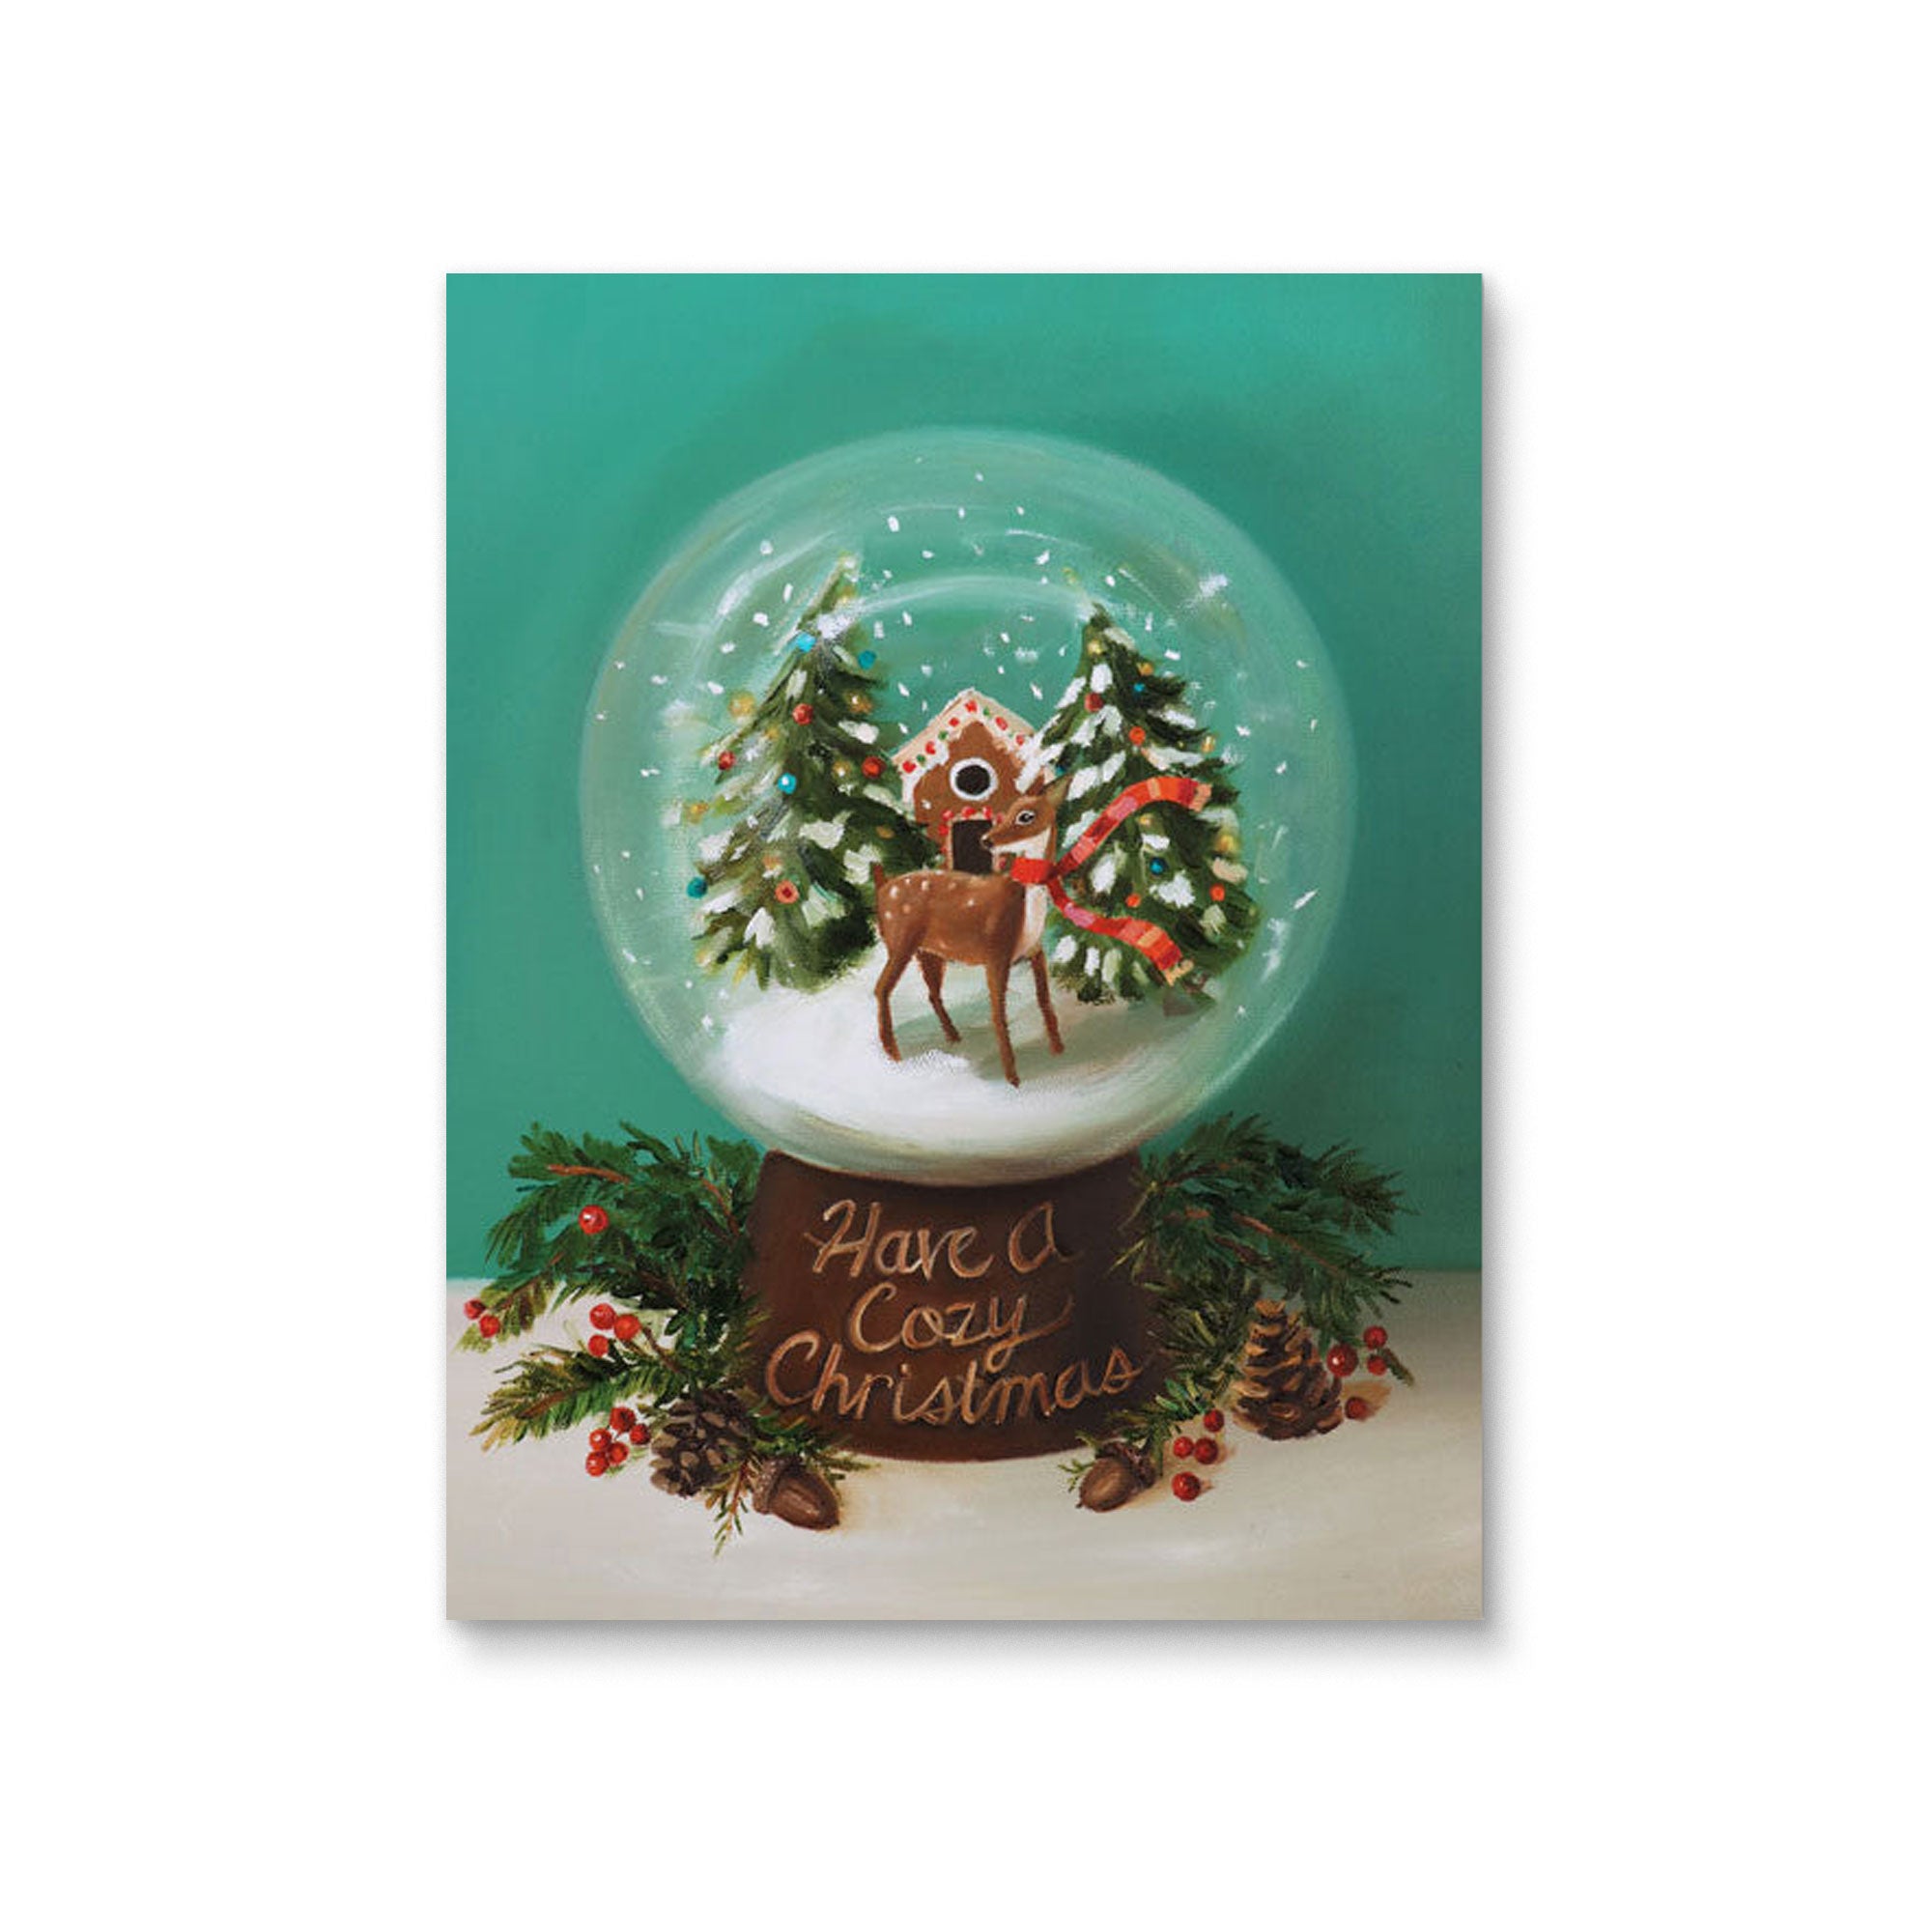 Have a Cozy Christmas Boxed Cards (Set of 8)